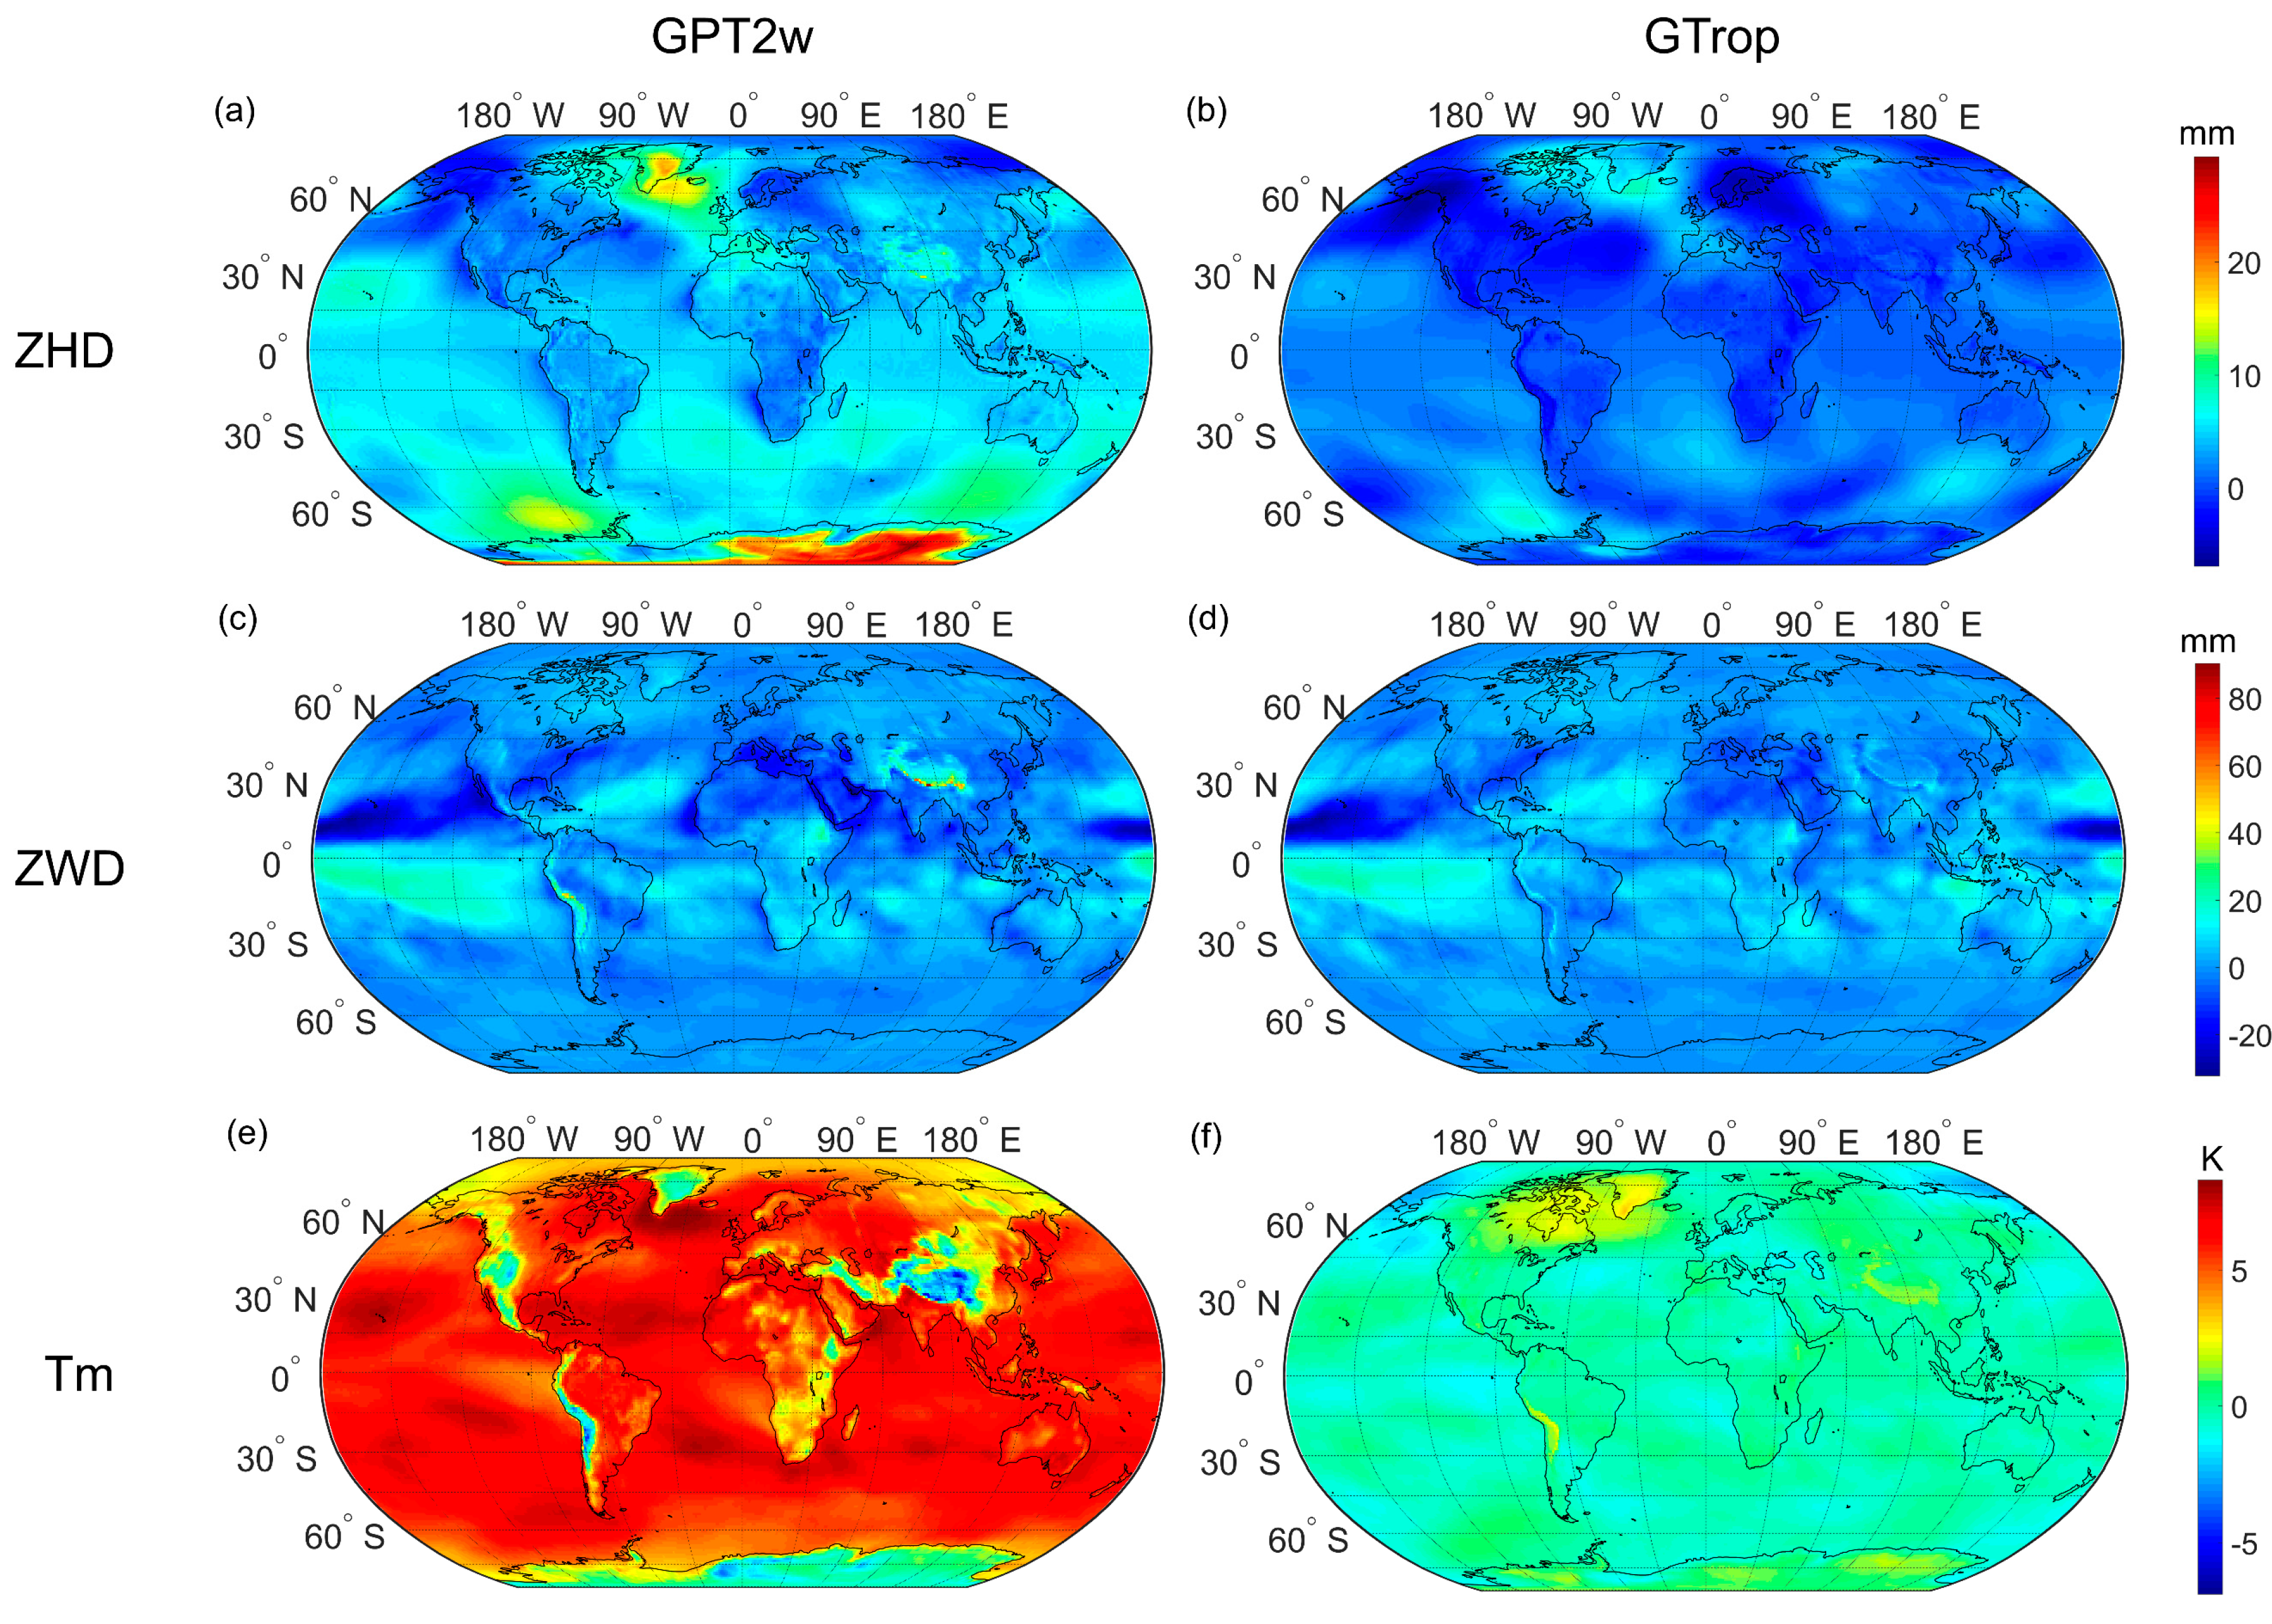 Global bias of GTrop and GPT2w validated by ECMWF data